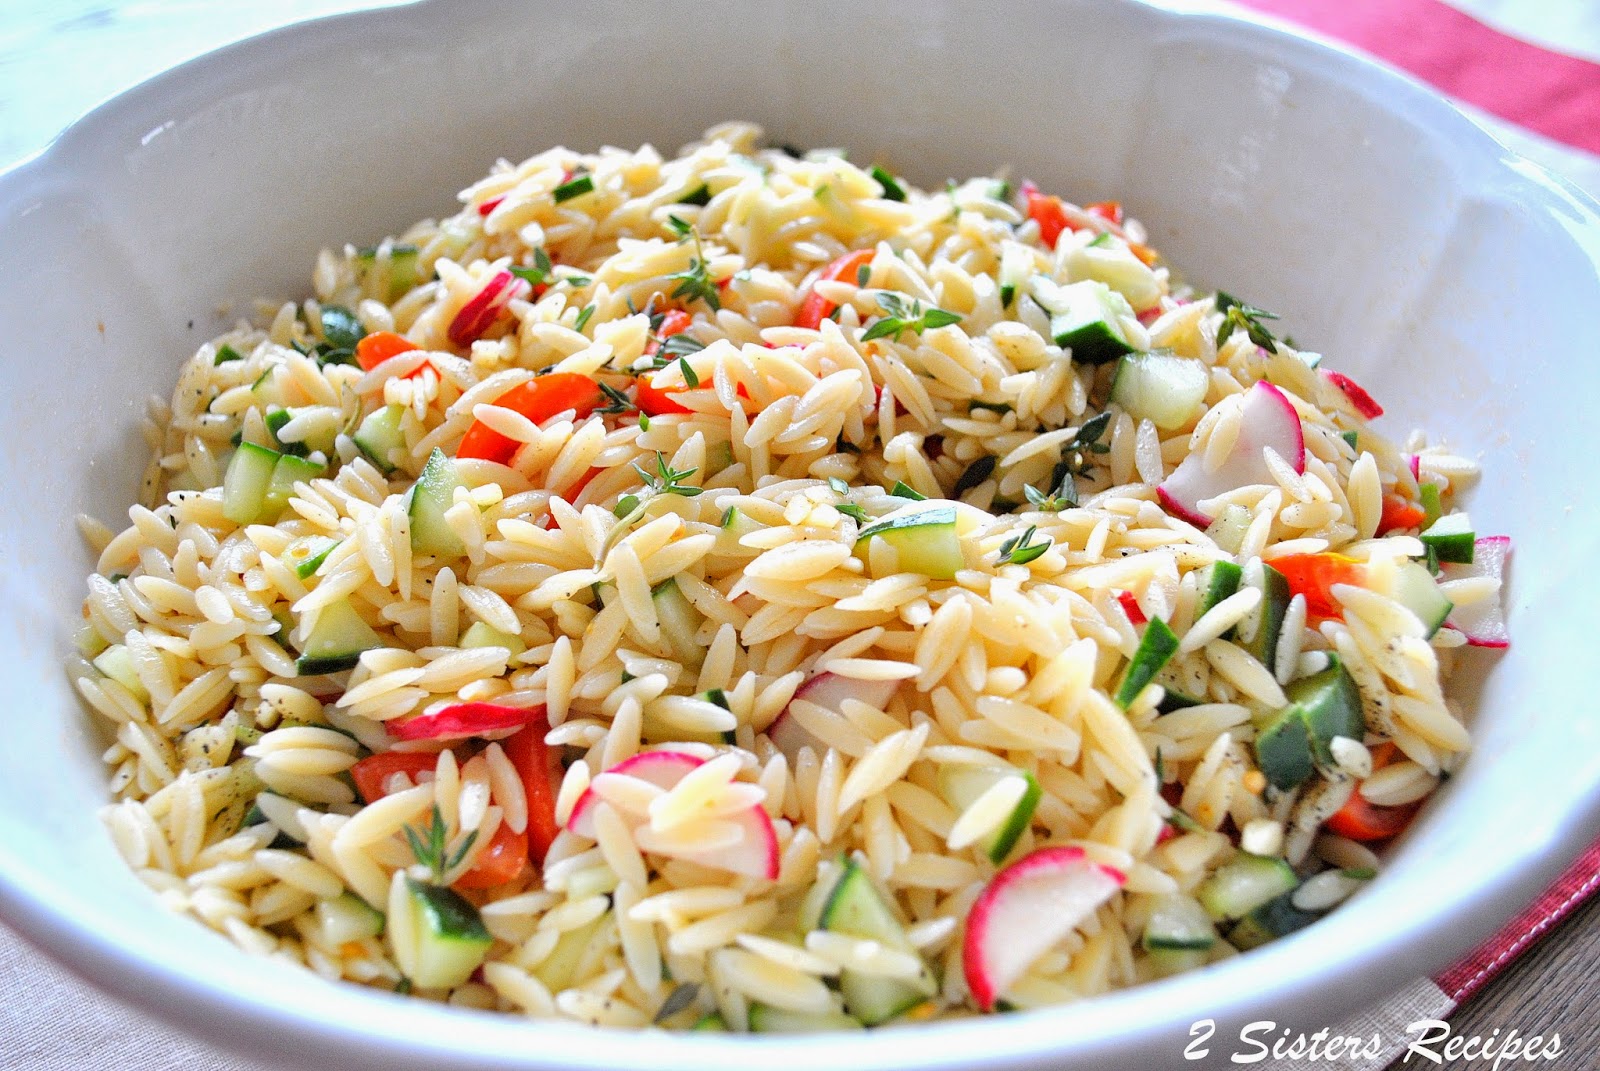 Orzo Salad with Champagne Vinaigrette by 2sistersrecipes.com